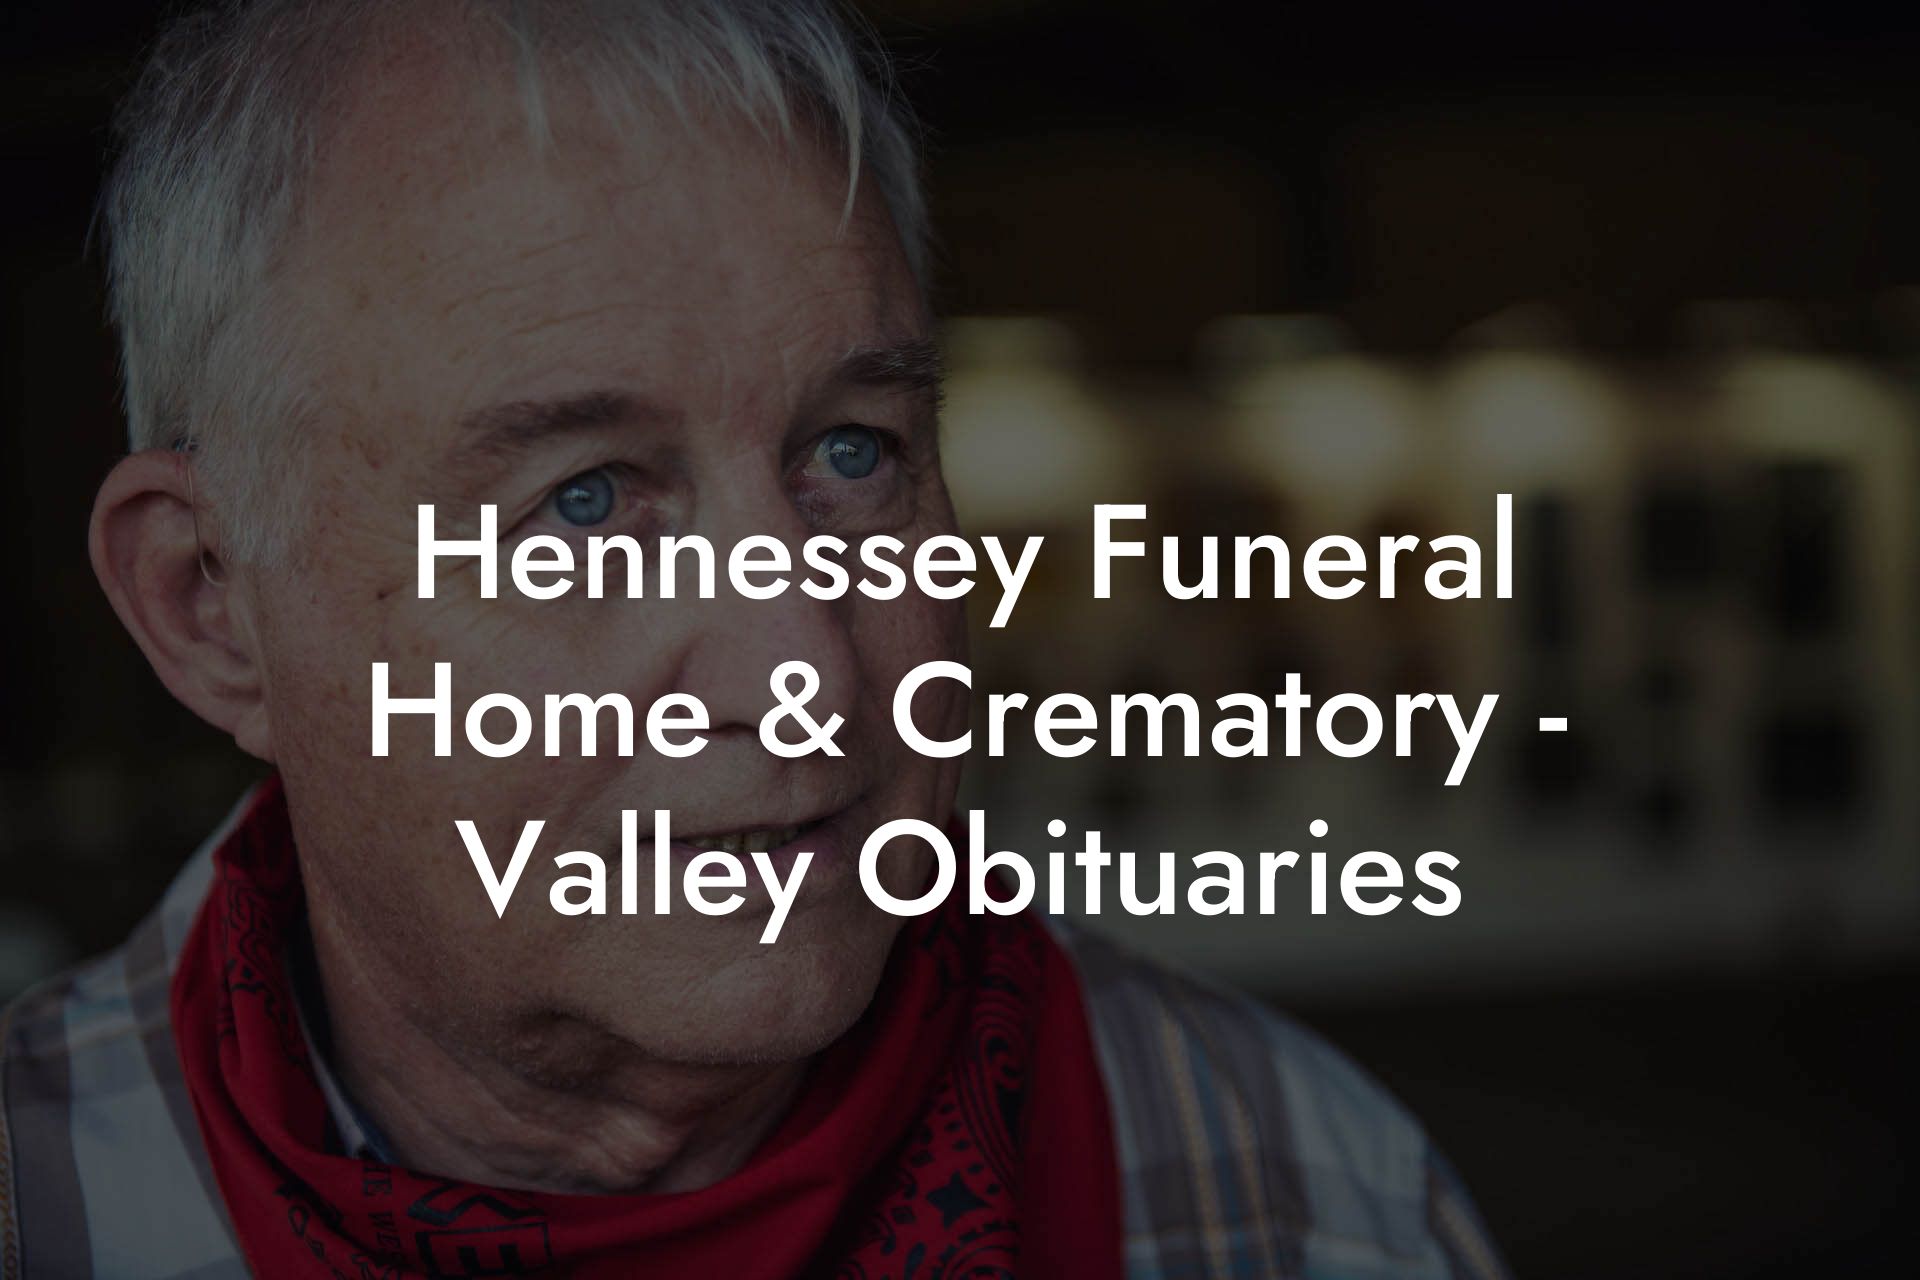 Hennessey Funeral Home & Crematory - Valley Obituaries